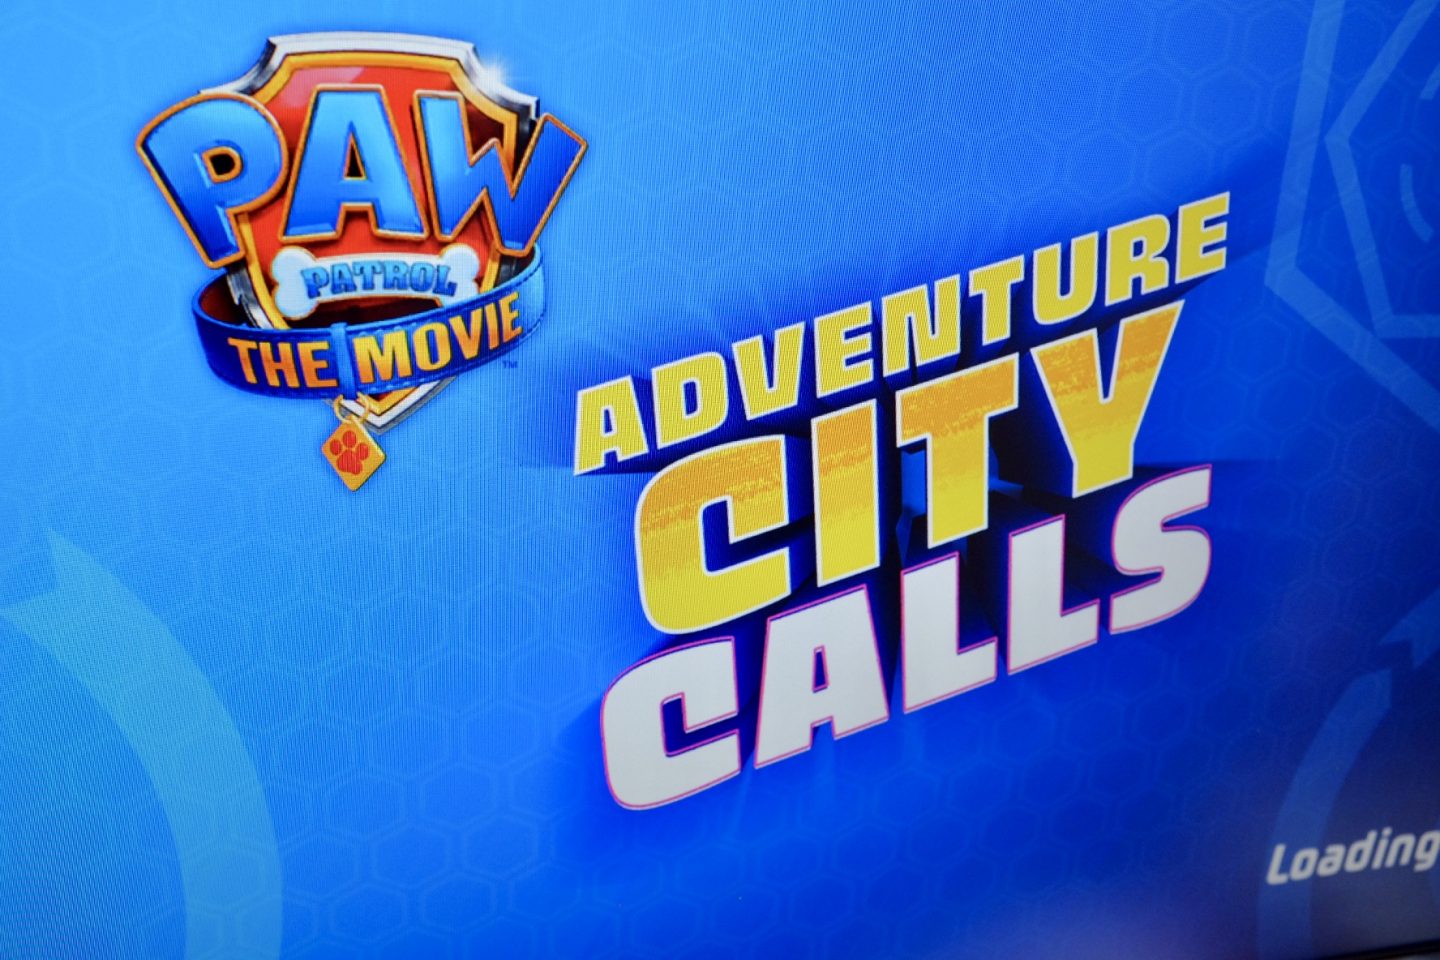 Paw Patrol The Movie: Adventure City Calls Game REVIEW | AD